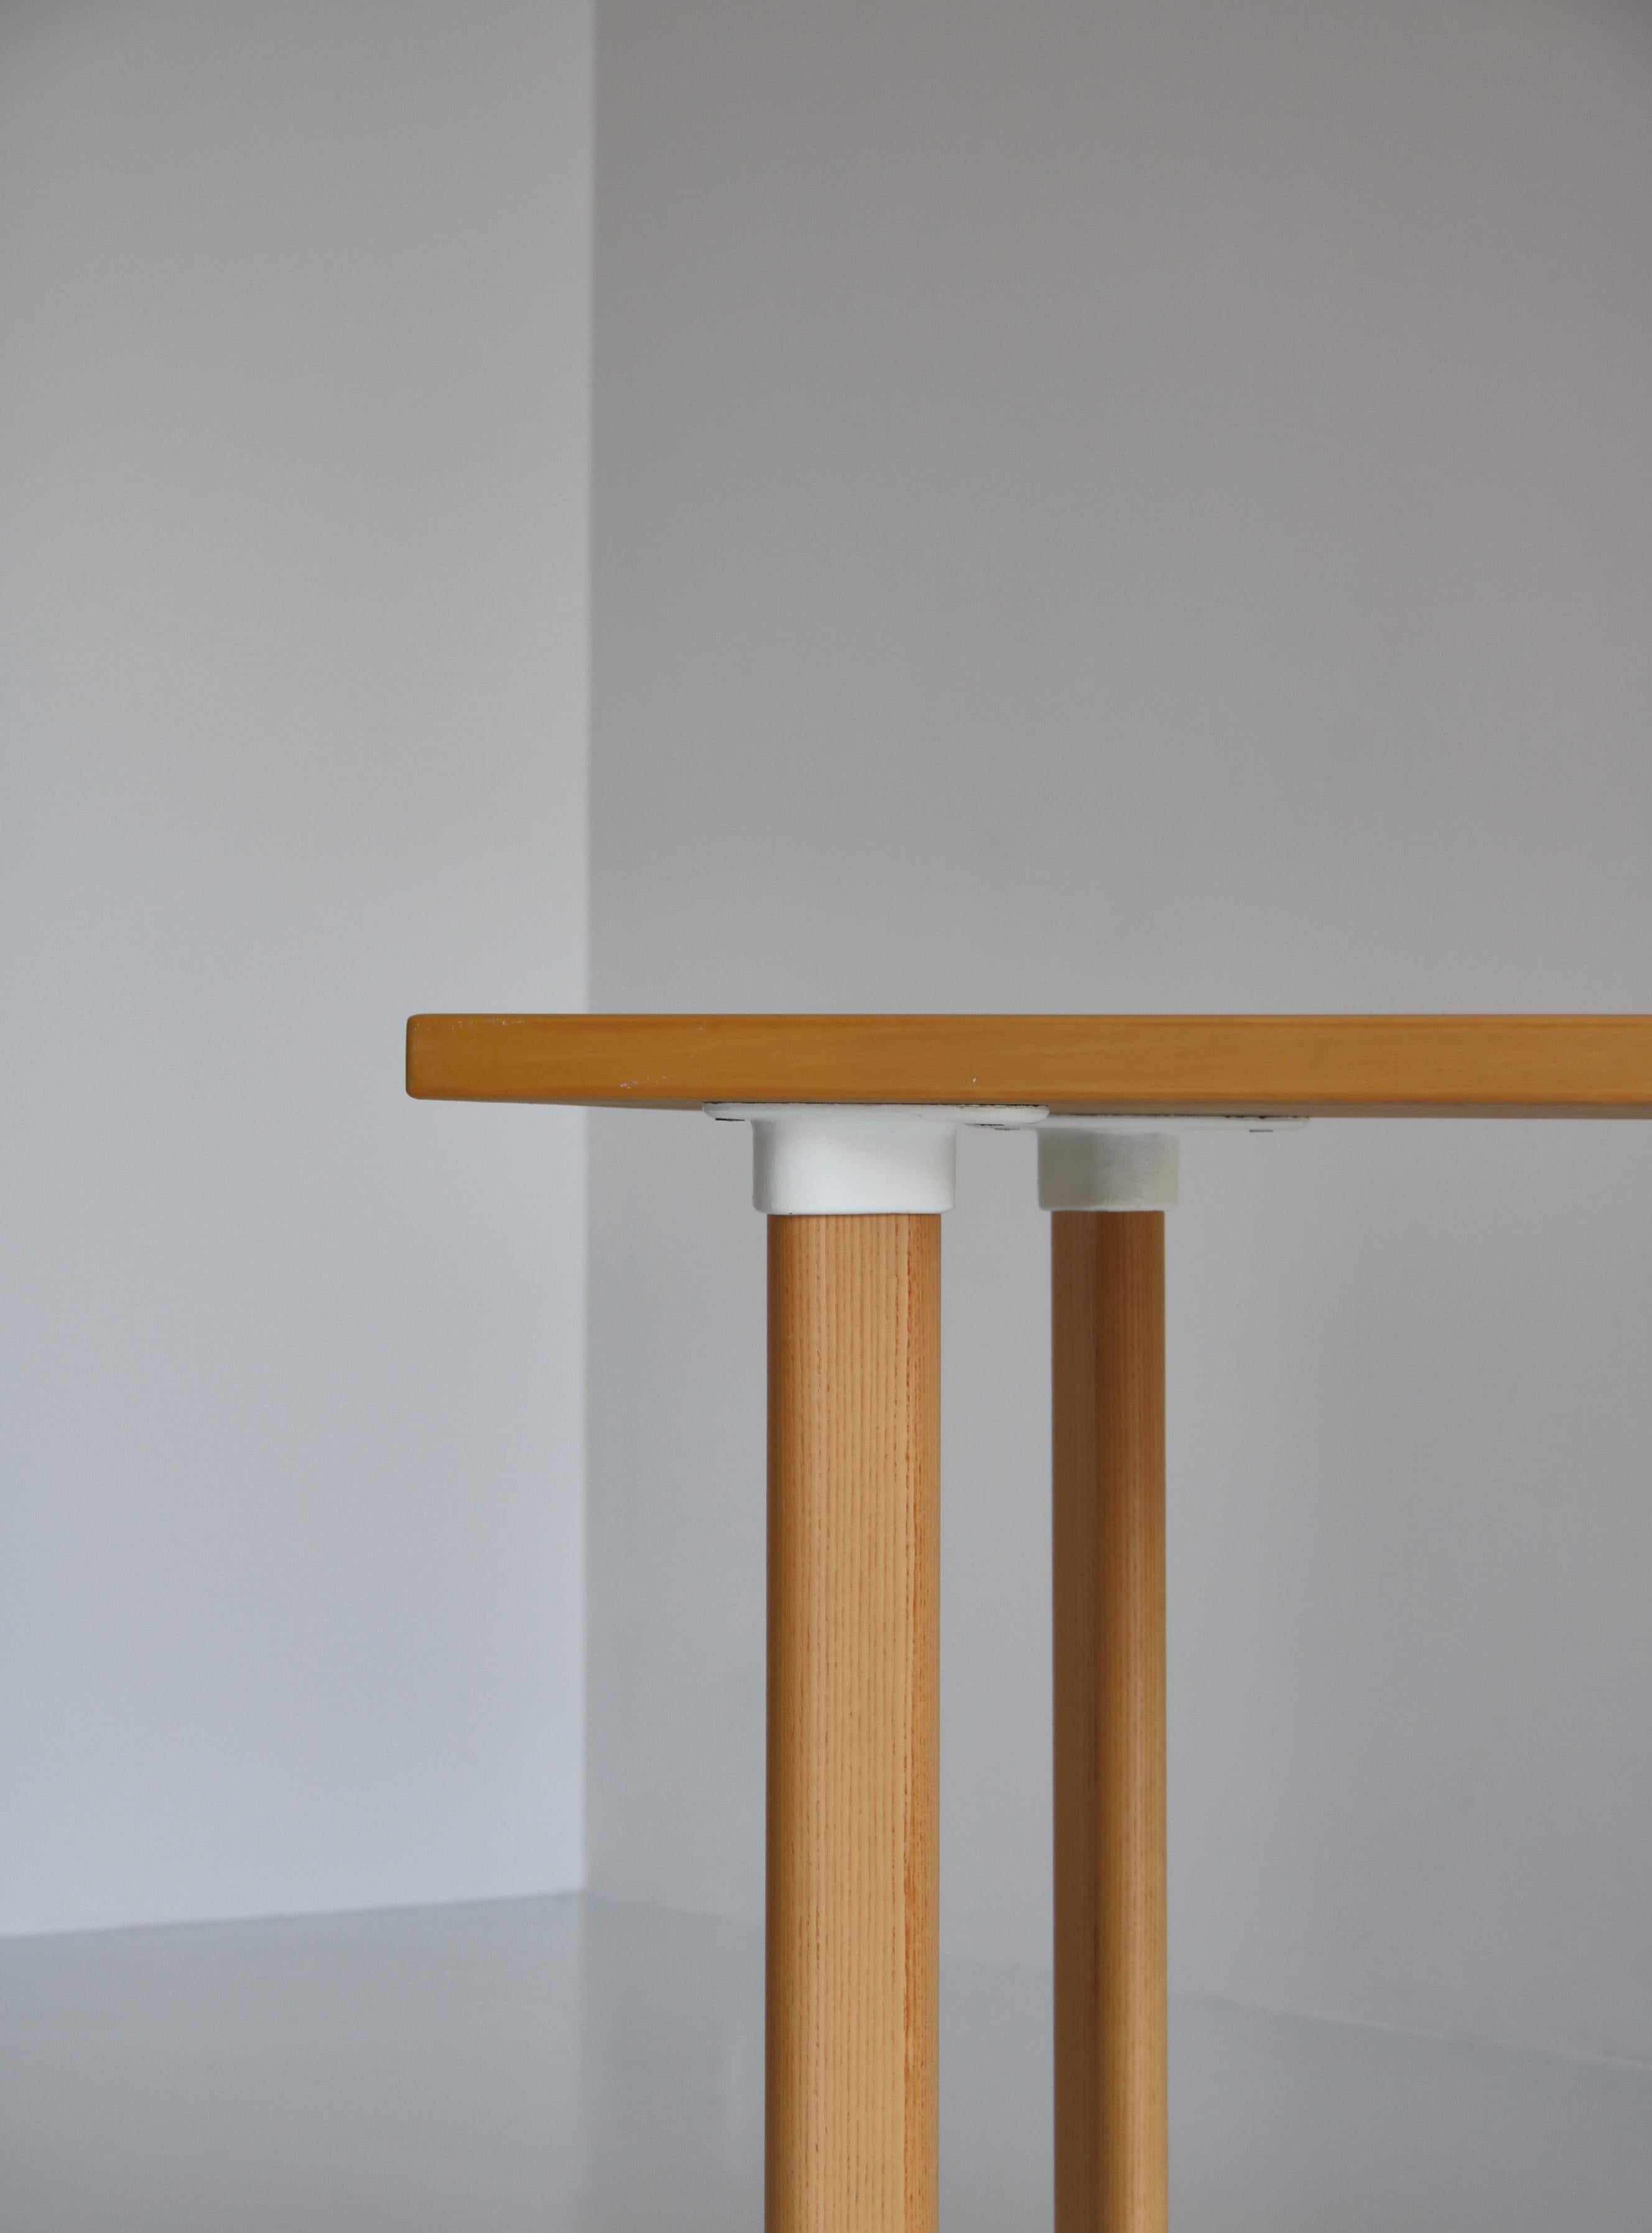 Mid-20th Century Alvar Aalto Desk and Chair Model 65, made by Artek, Finland in the 1960s